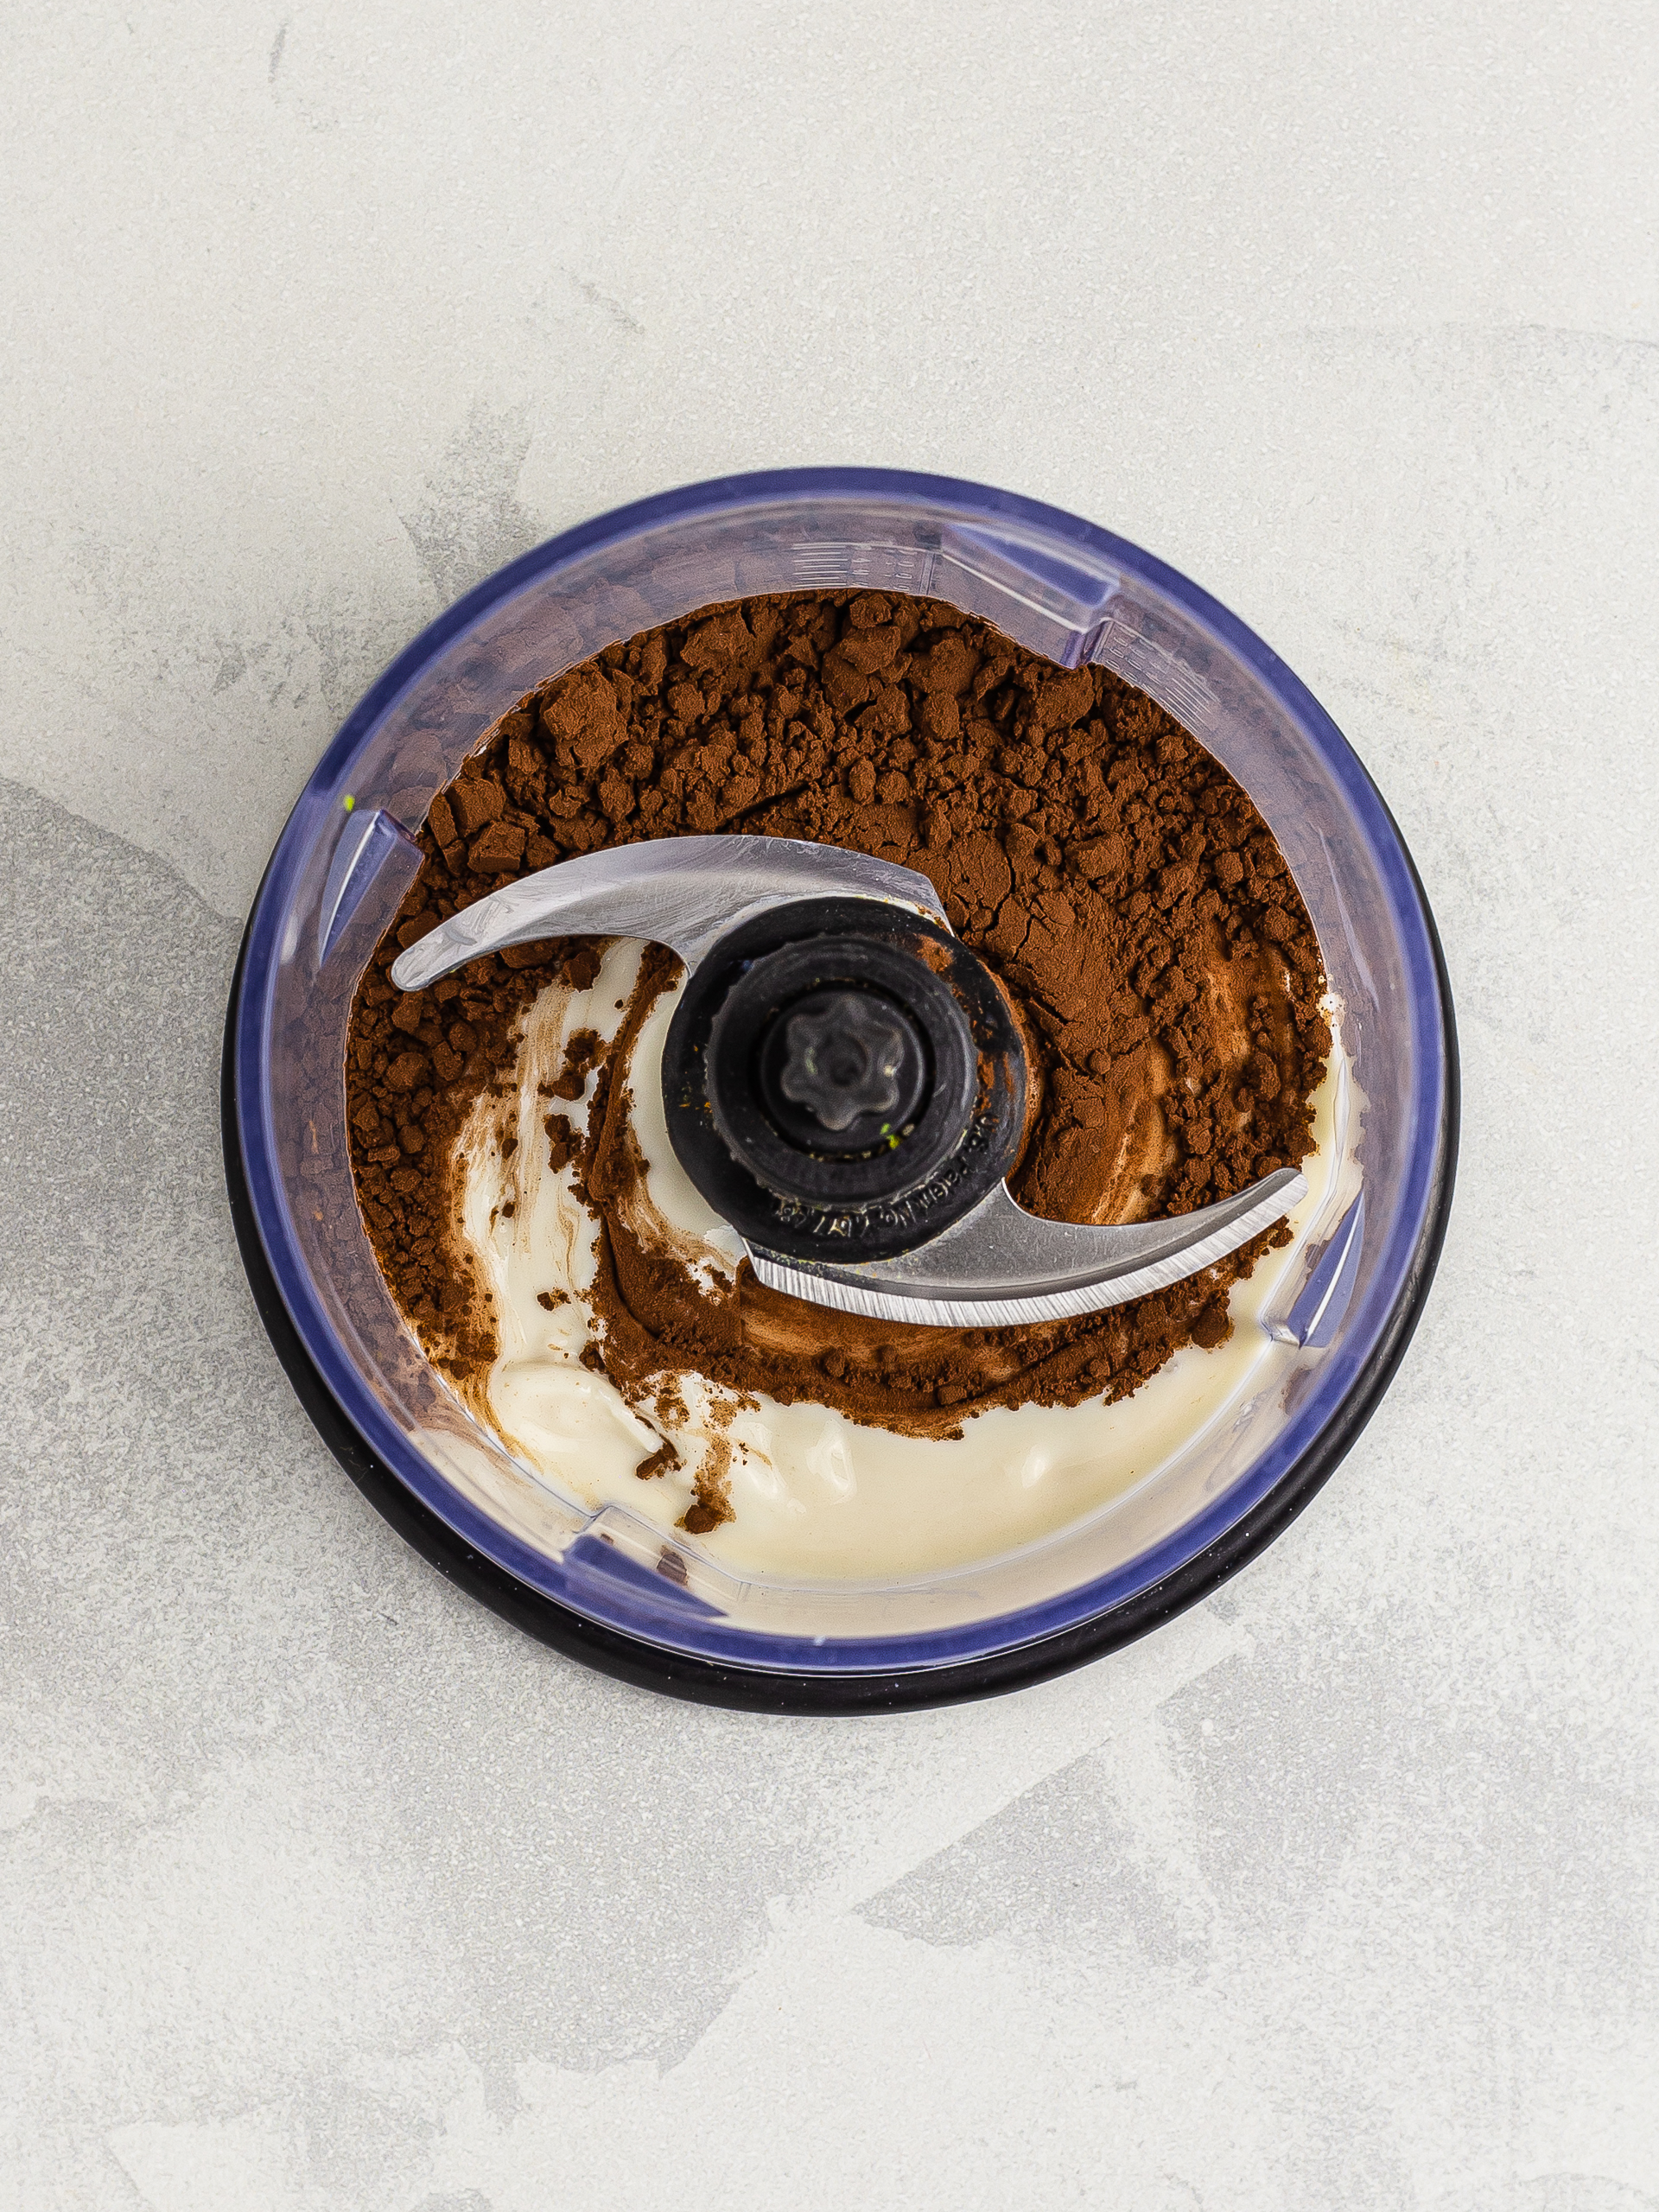 Cocoa and yogurt in the blender